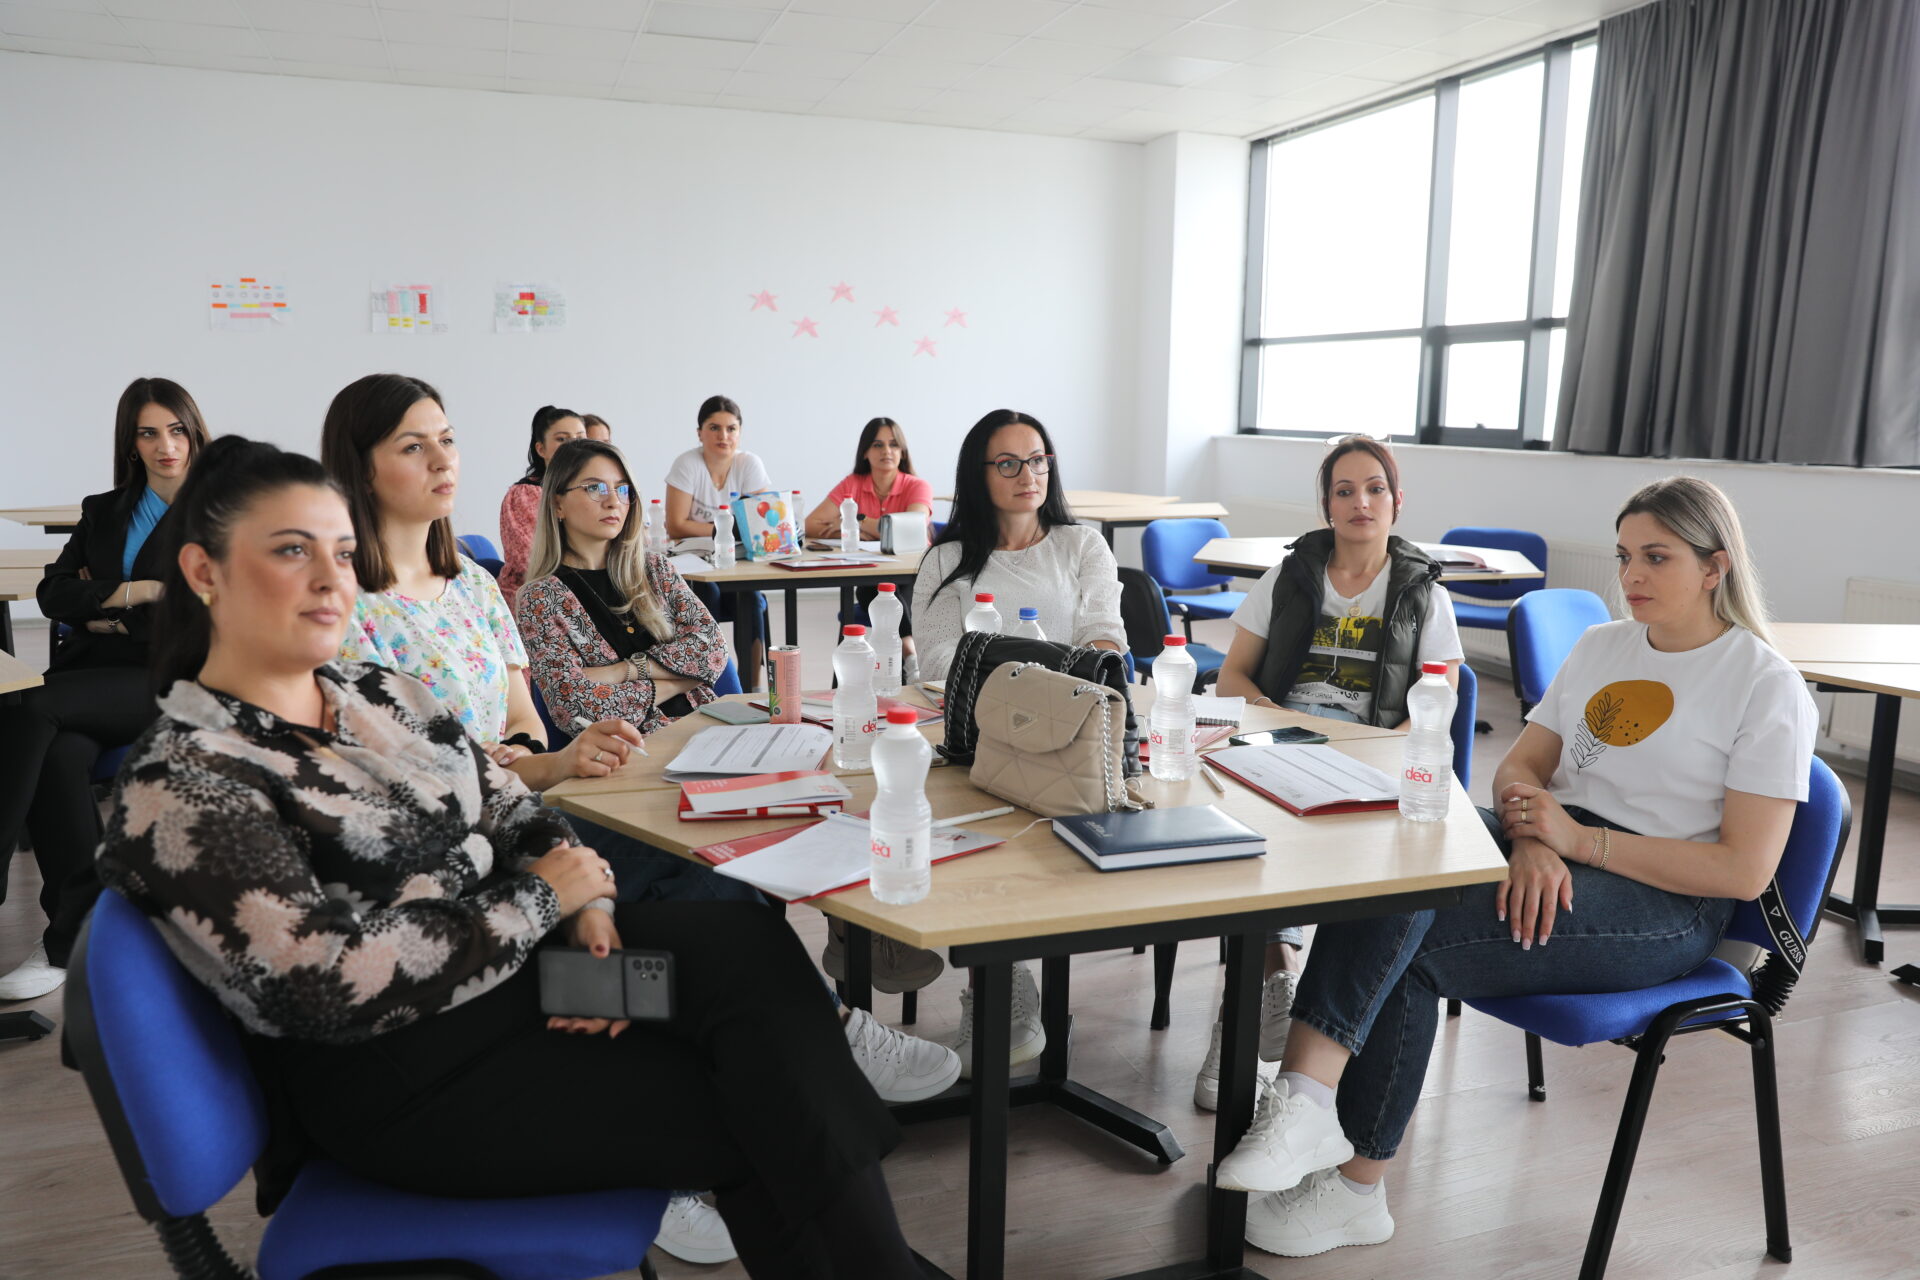 Student training starts from the Center for Professional Training and the Faculty of Social Sciences